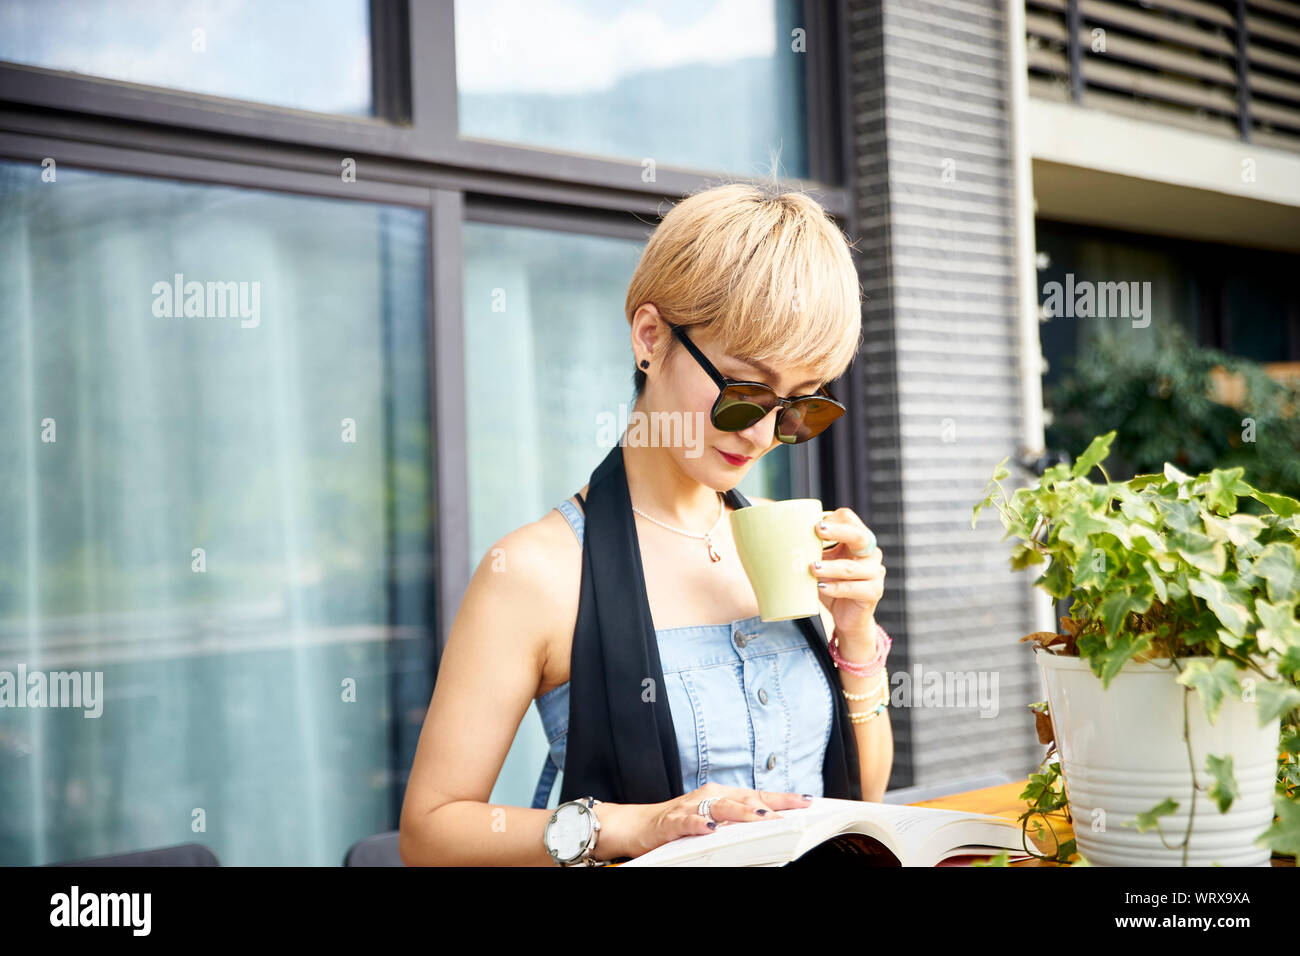 young asian woman enjoying reading and coffee on patio Stock Photo